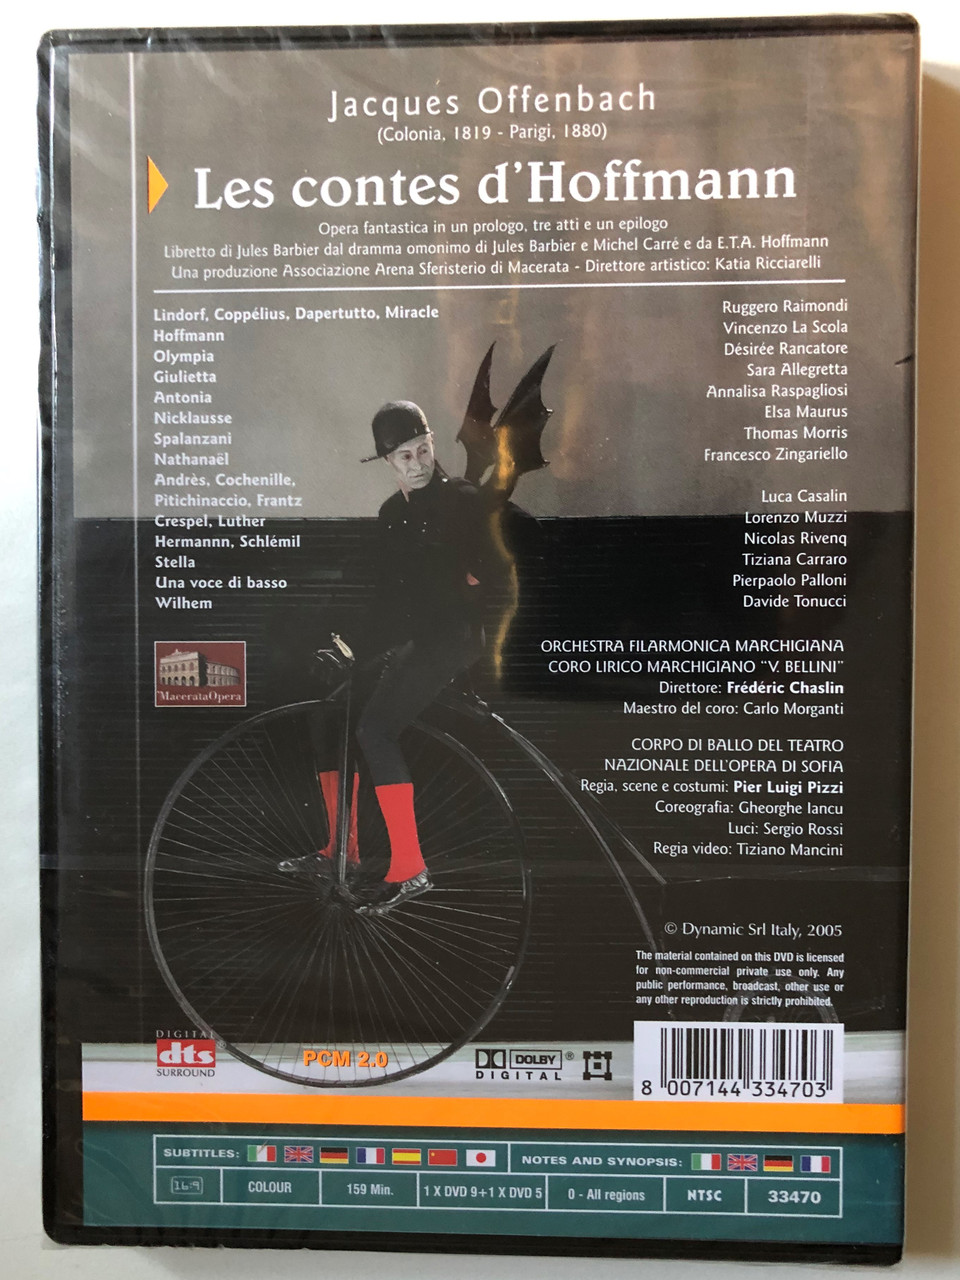 Les_Contes_Dhoffmann_2_DVD_Set_Fantastic_work_in_a_prologue_three_acts_and_an_epilogue_Libretto_by_Jules_Barbier_MARCHE_PHILHARMONIC_ORCHESTRA_LYRIC_CHOIR_MARCHE_V._BELLINI_3__70229.1691550907.1280.1280.JPG (960×1280)